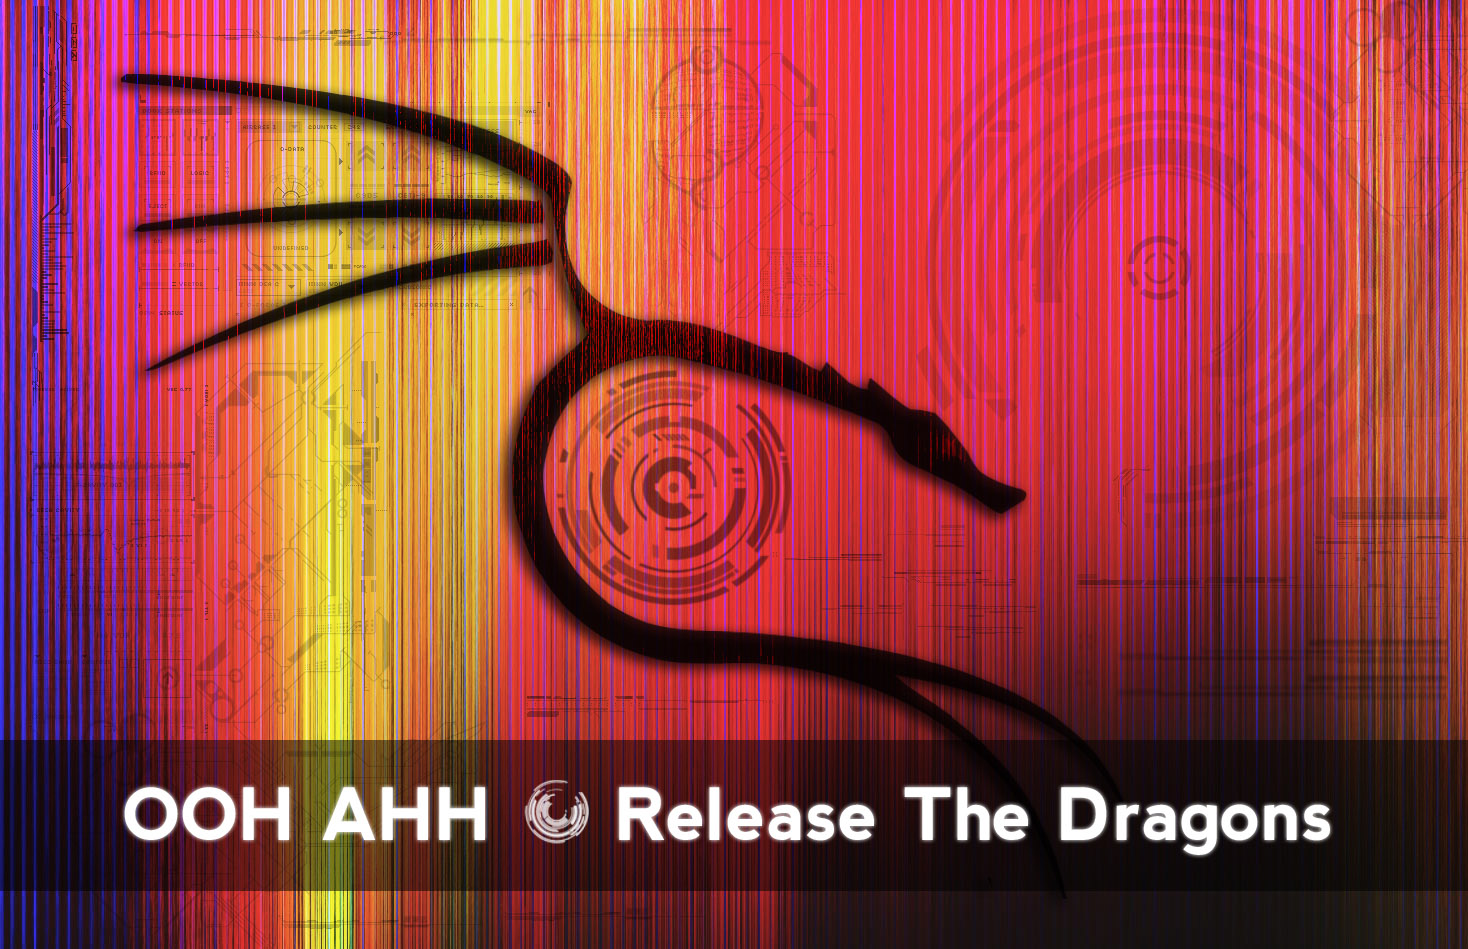 Release The Dragons